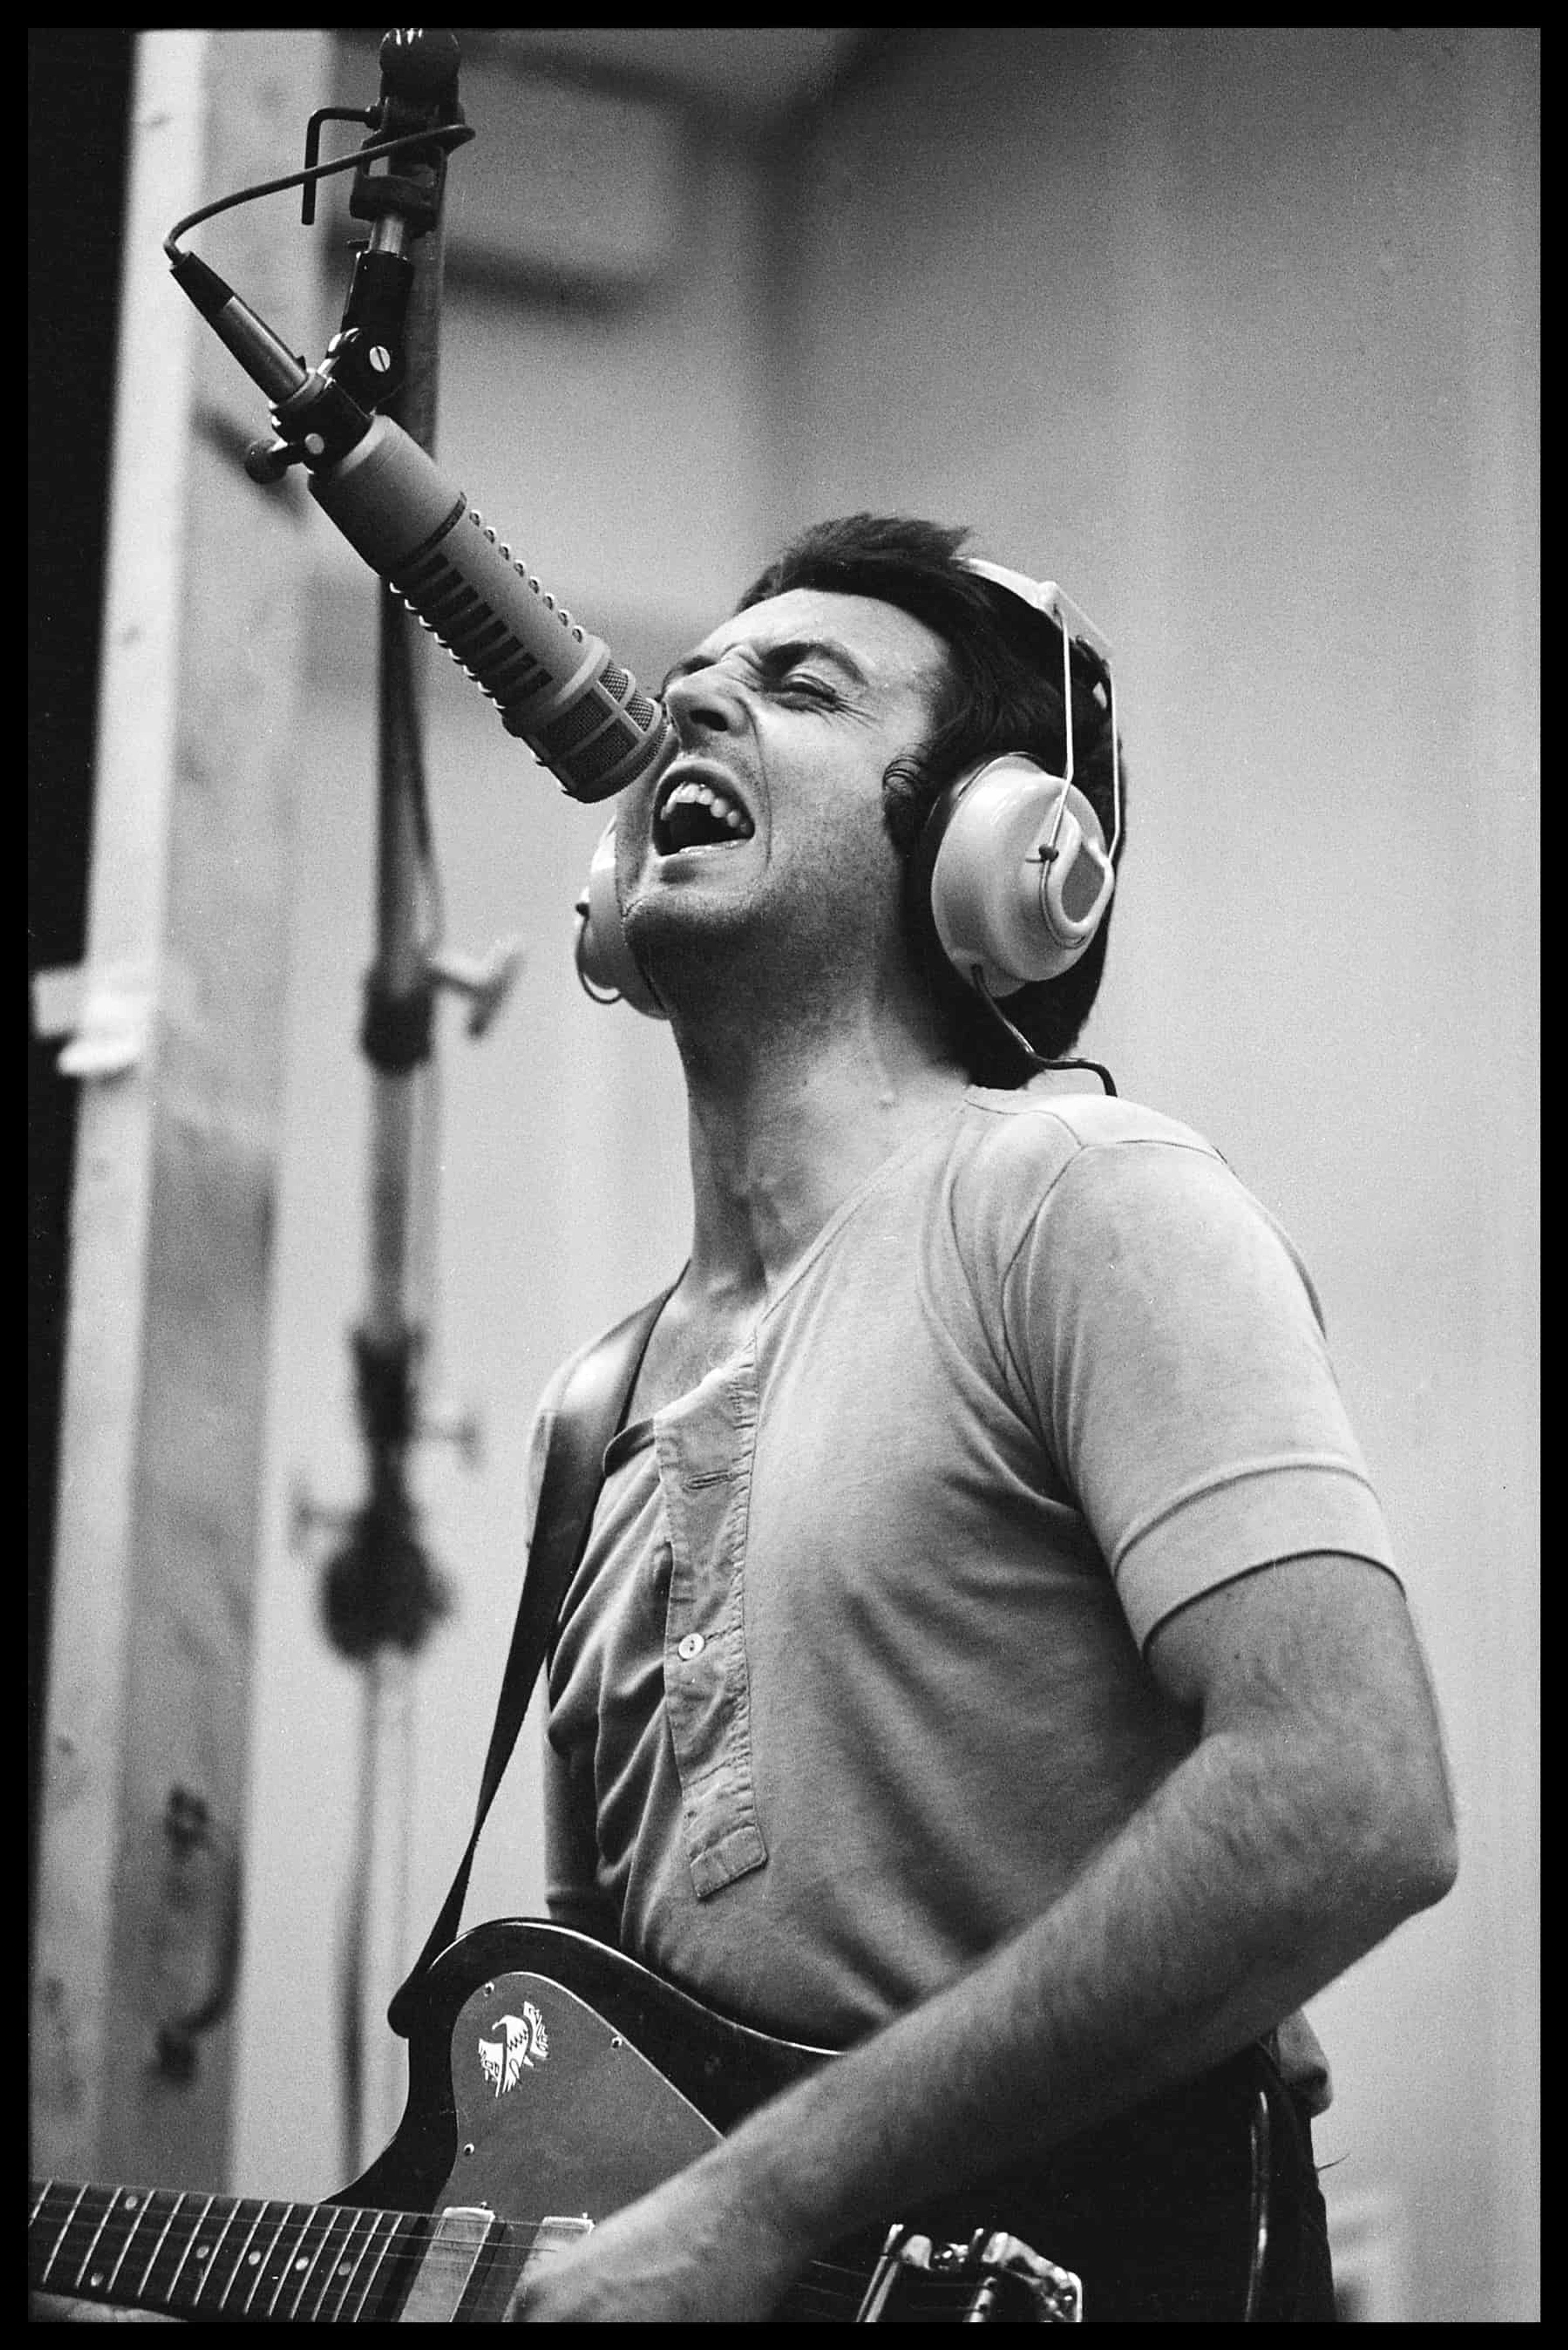 Paul singing into a studio microphone 